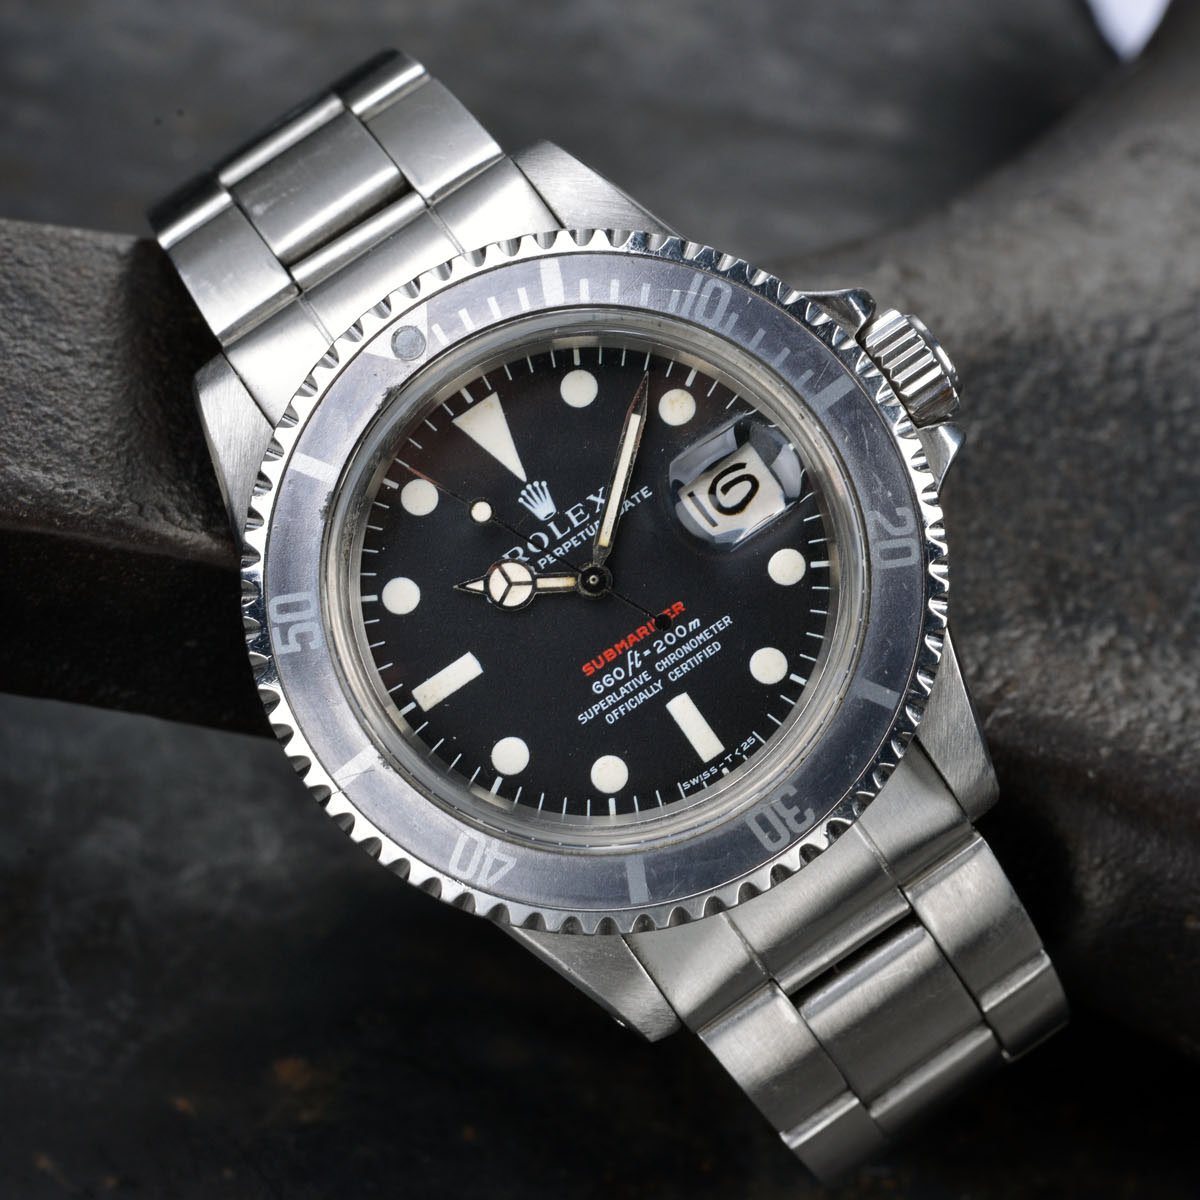 ROLEX 1680 RED SUBMARINER FROM 1972